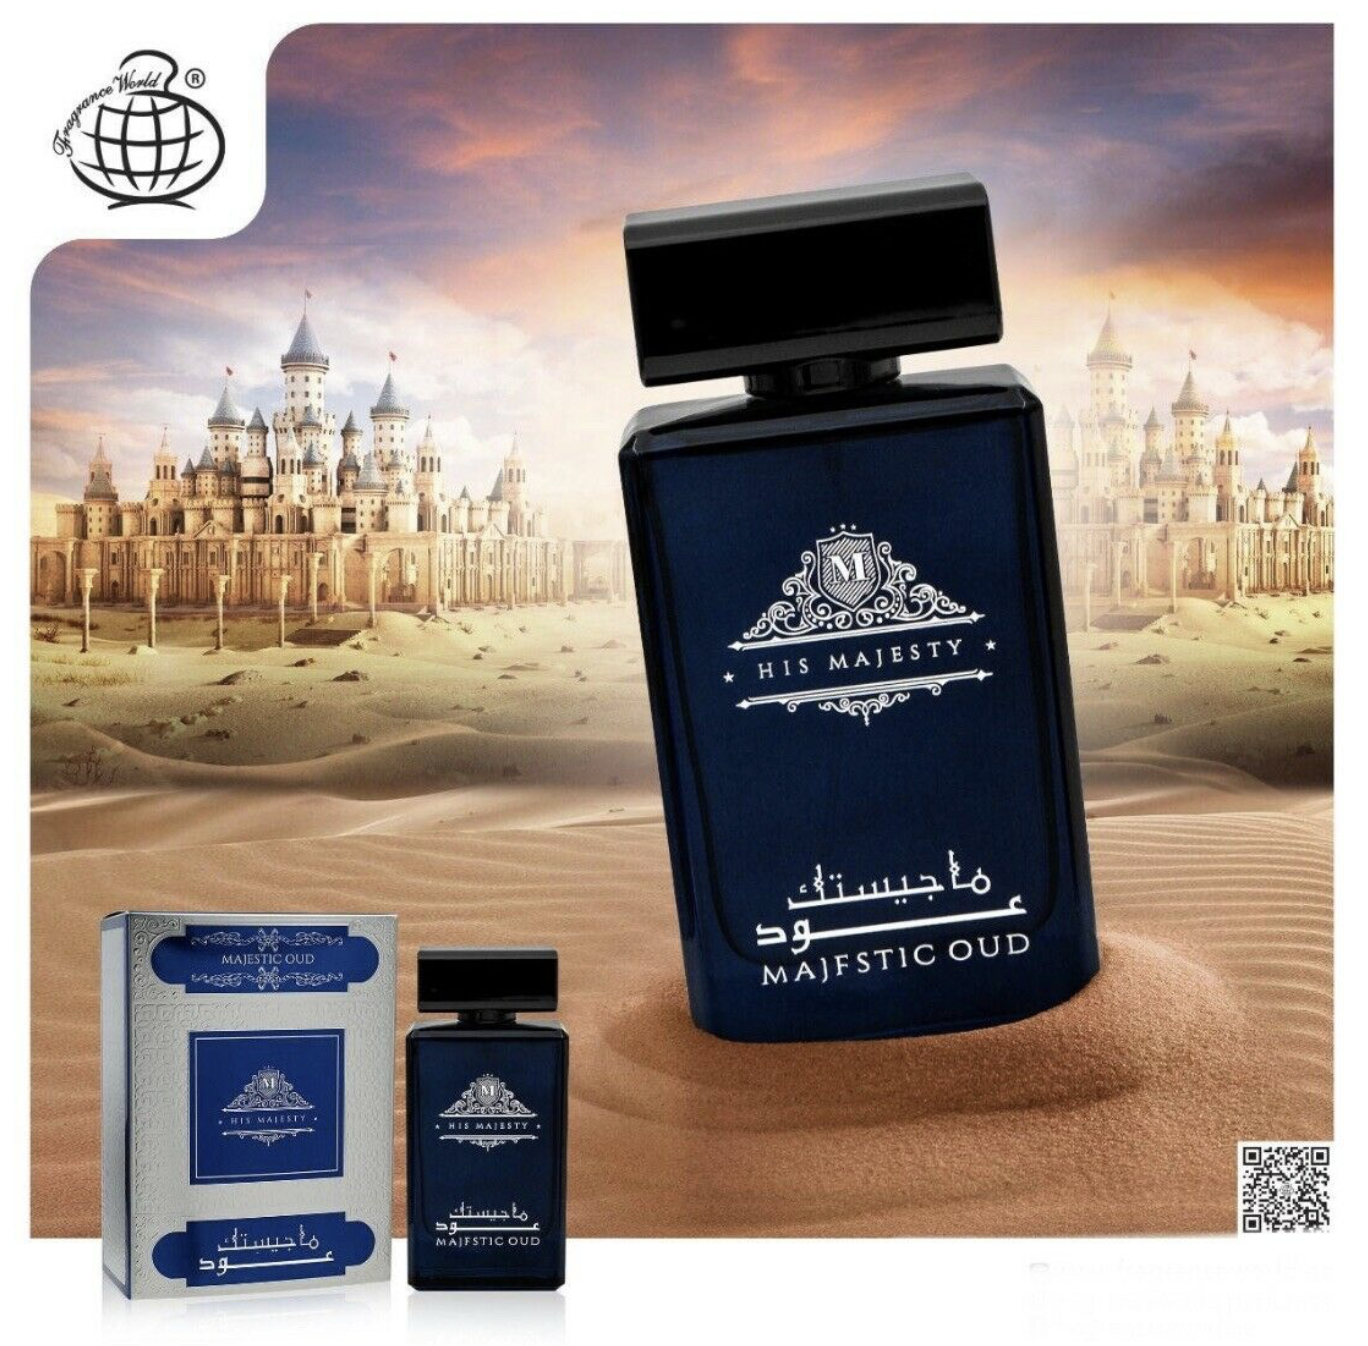 Majestic Oud (HIS MAJESTY) EDP Perfume By Fragrance World 100ML - US SELLER